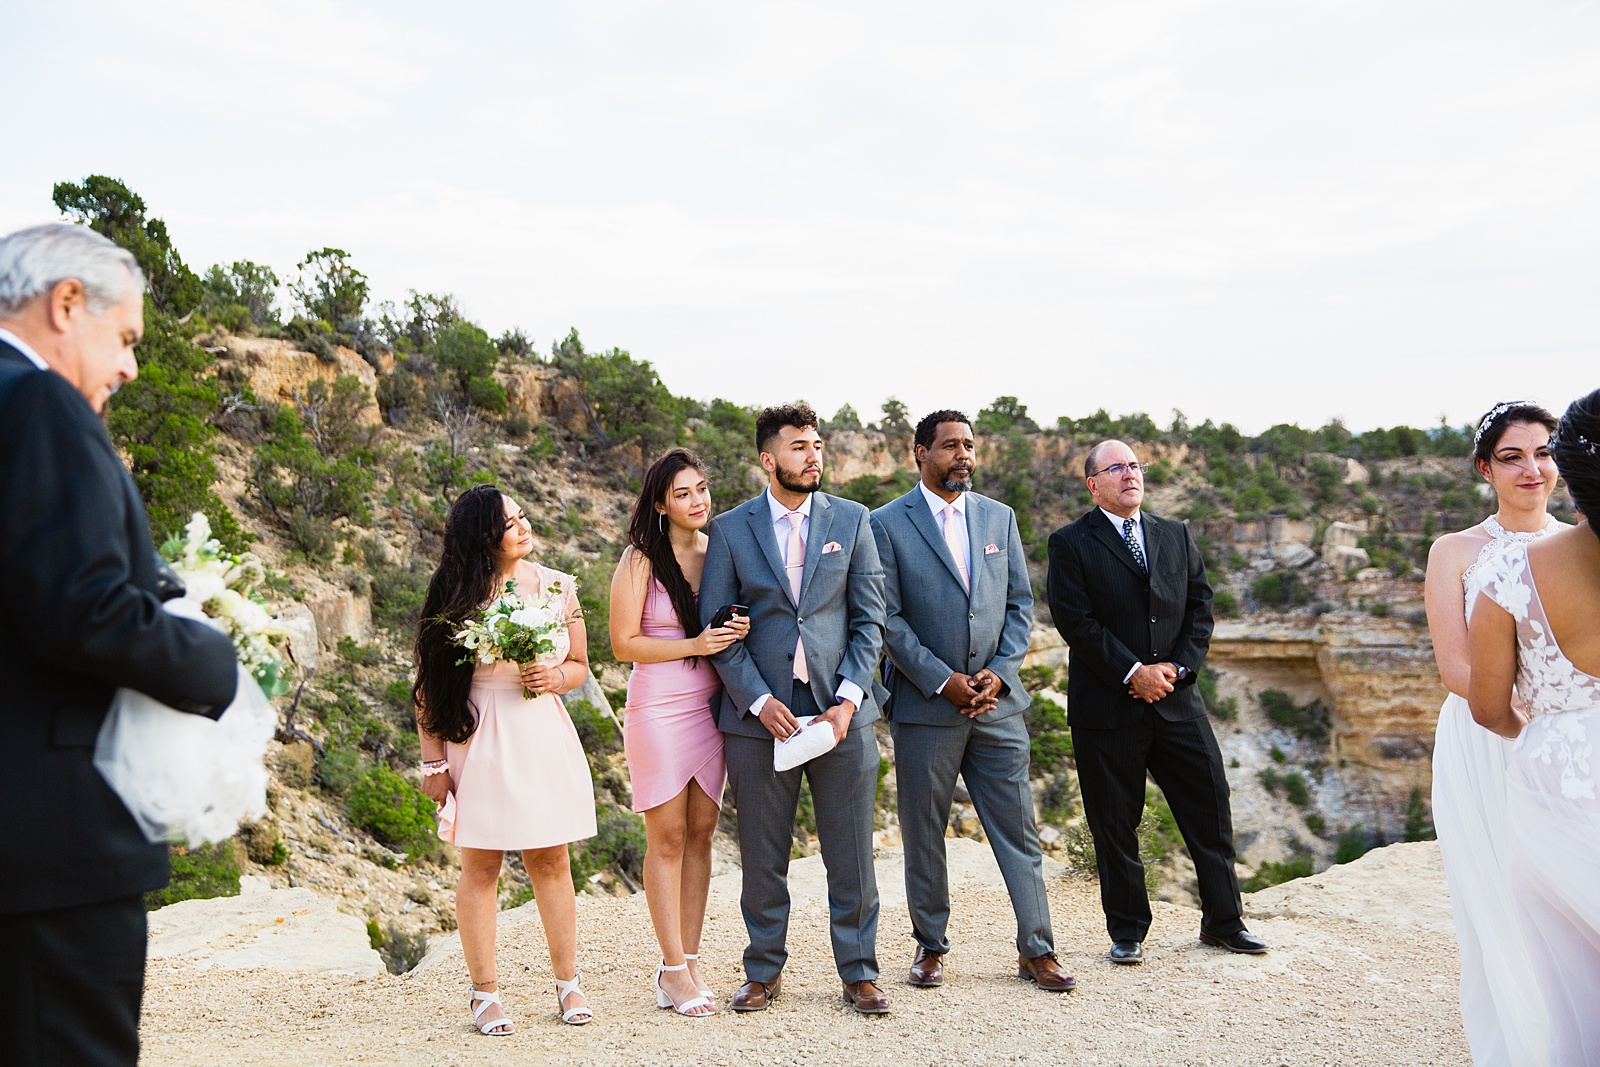 Guests at a Grand Canyon elopement by PMA Photography.